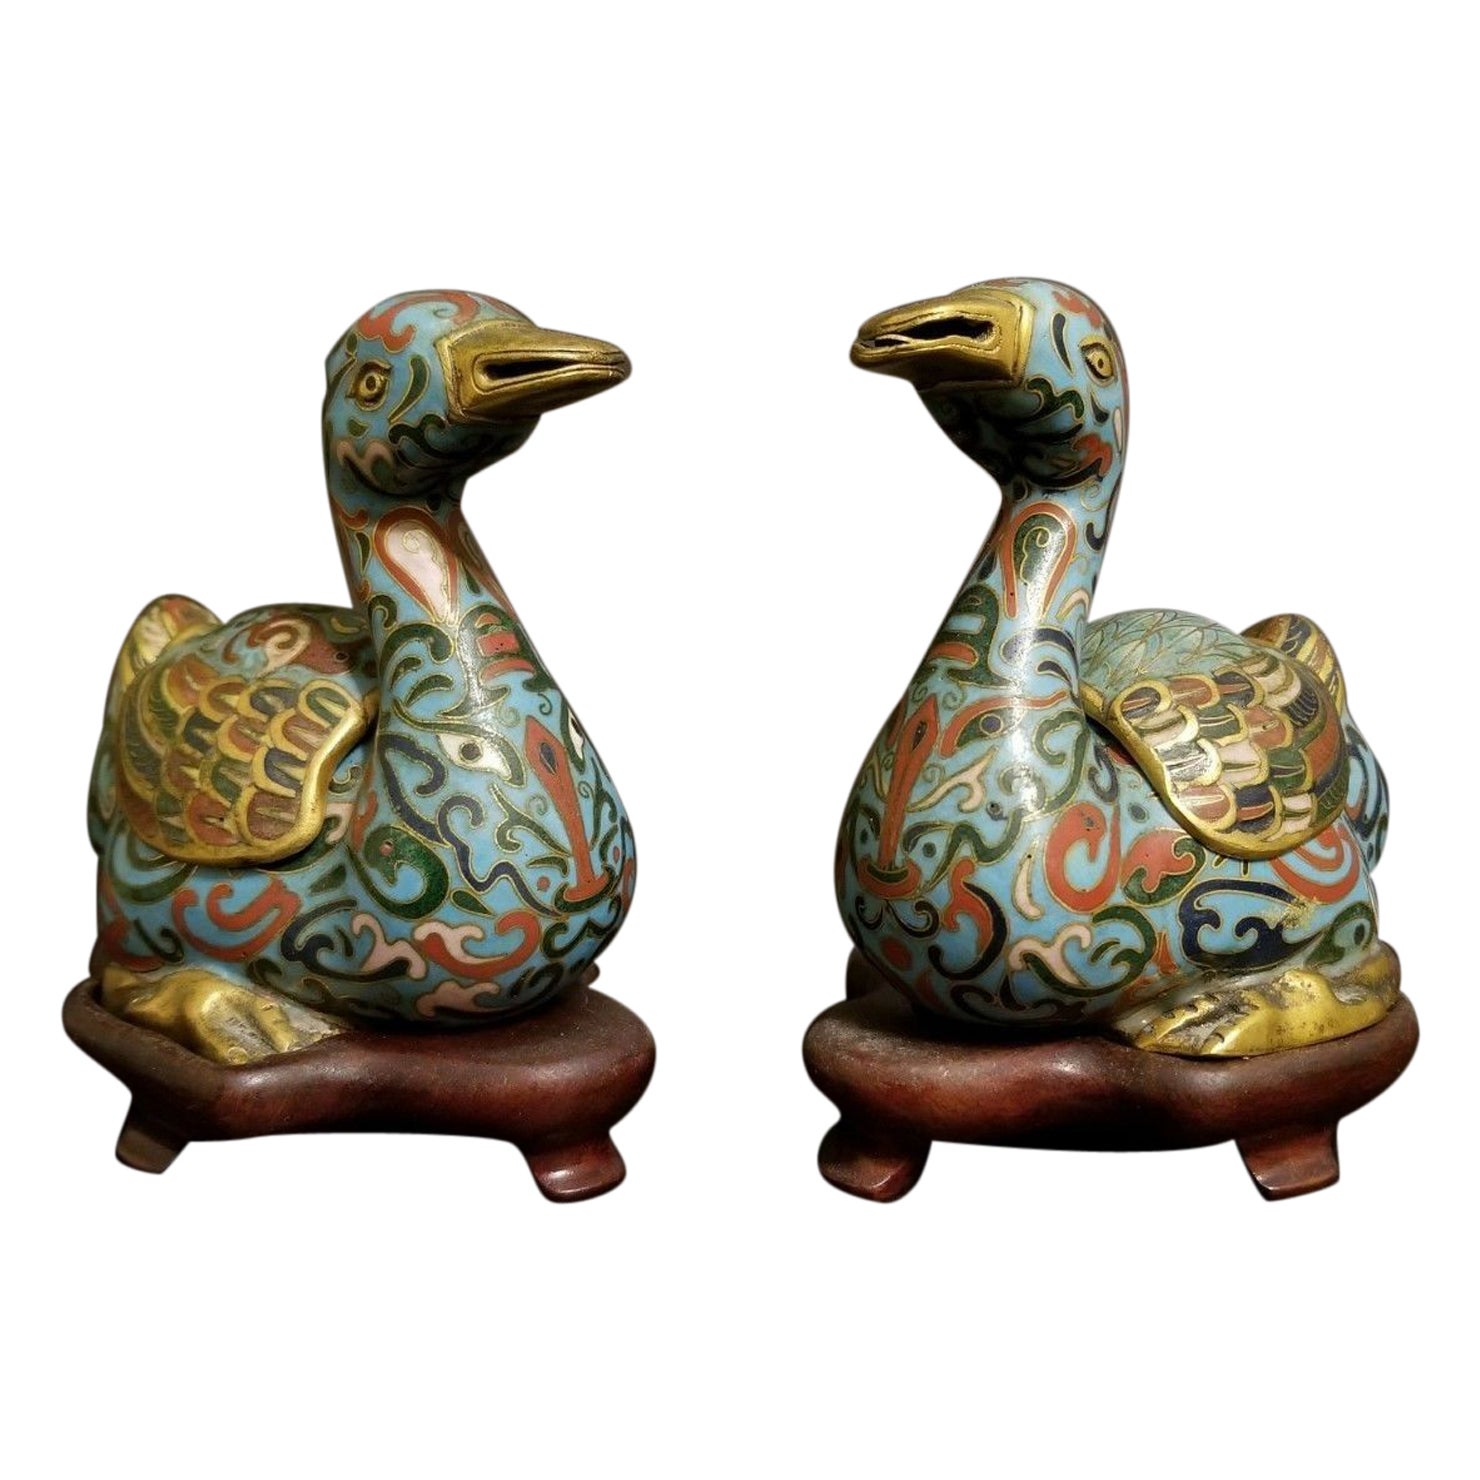 1880's Pair of Chinese Cloisonné Enamel Censer, Ducks on the Fitted Wood Base